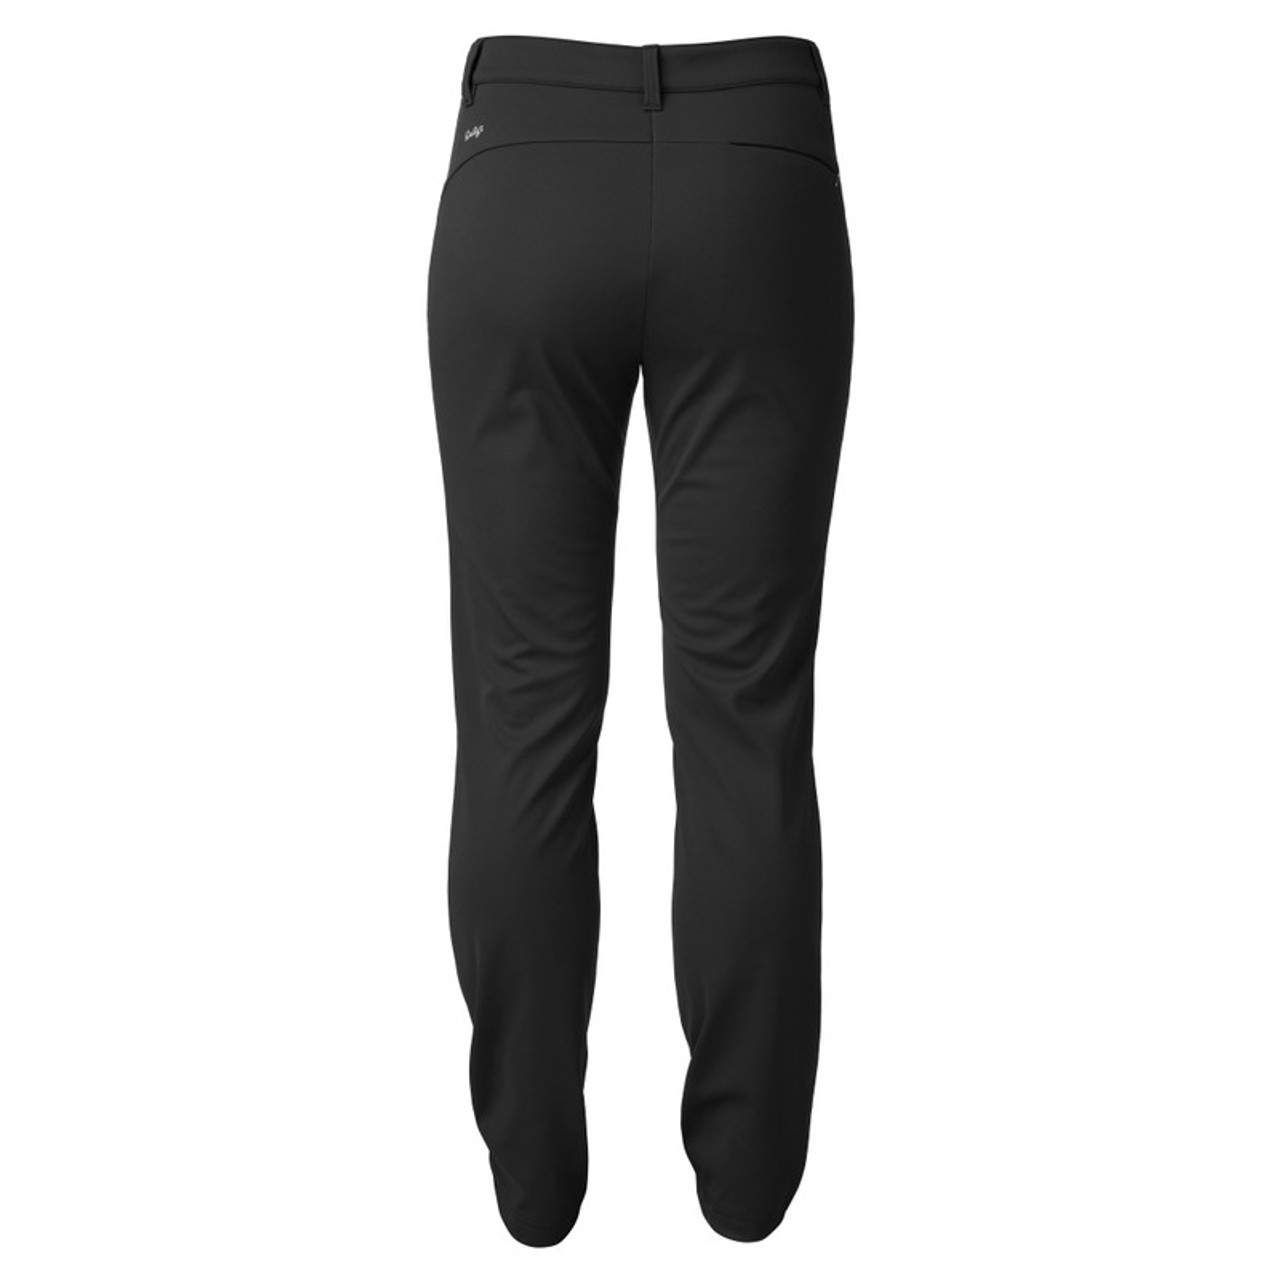 Daily Sports Magic High Water Ankle Pants - Staple Blue